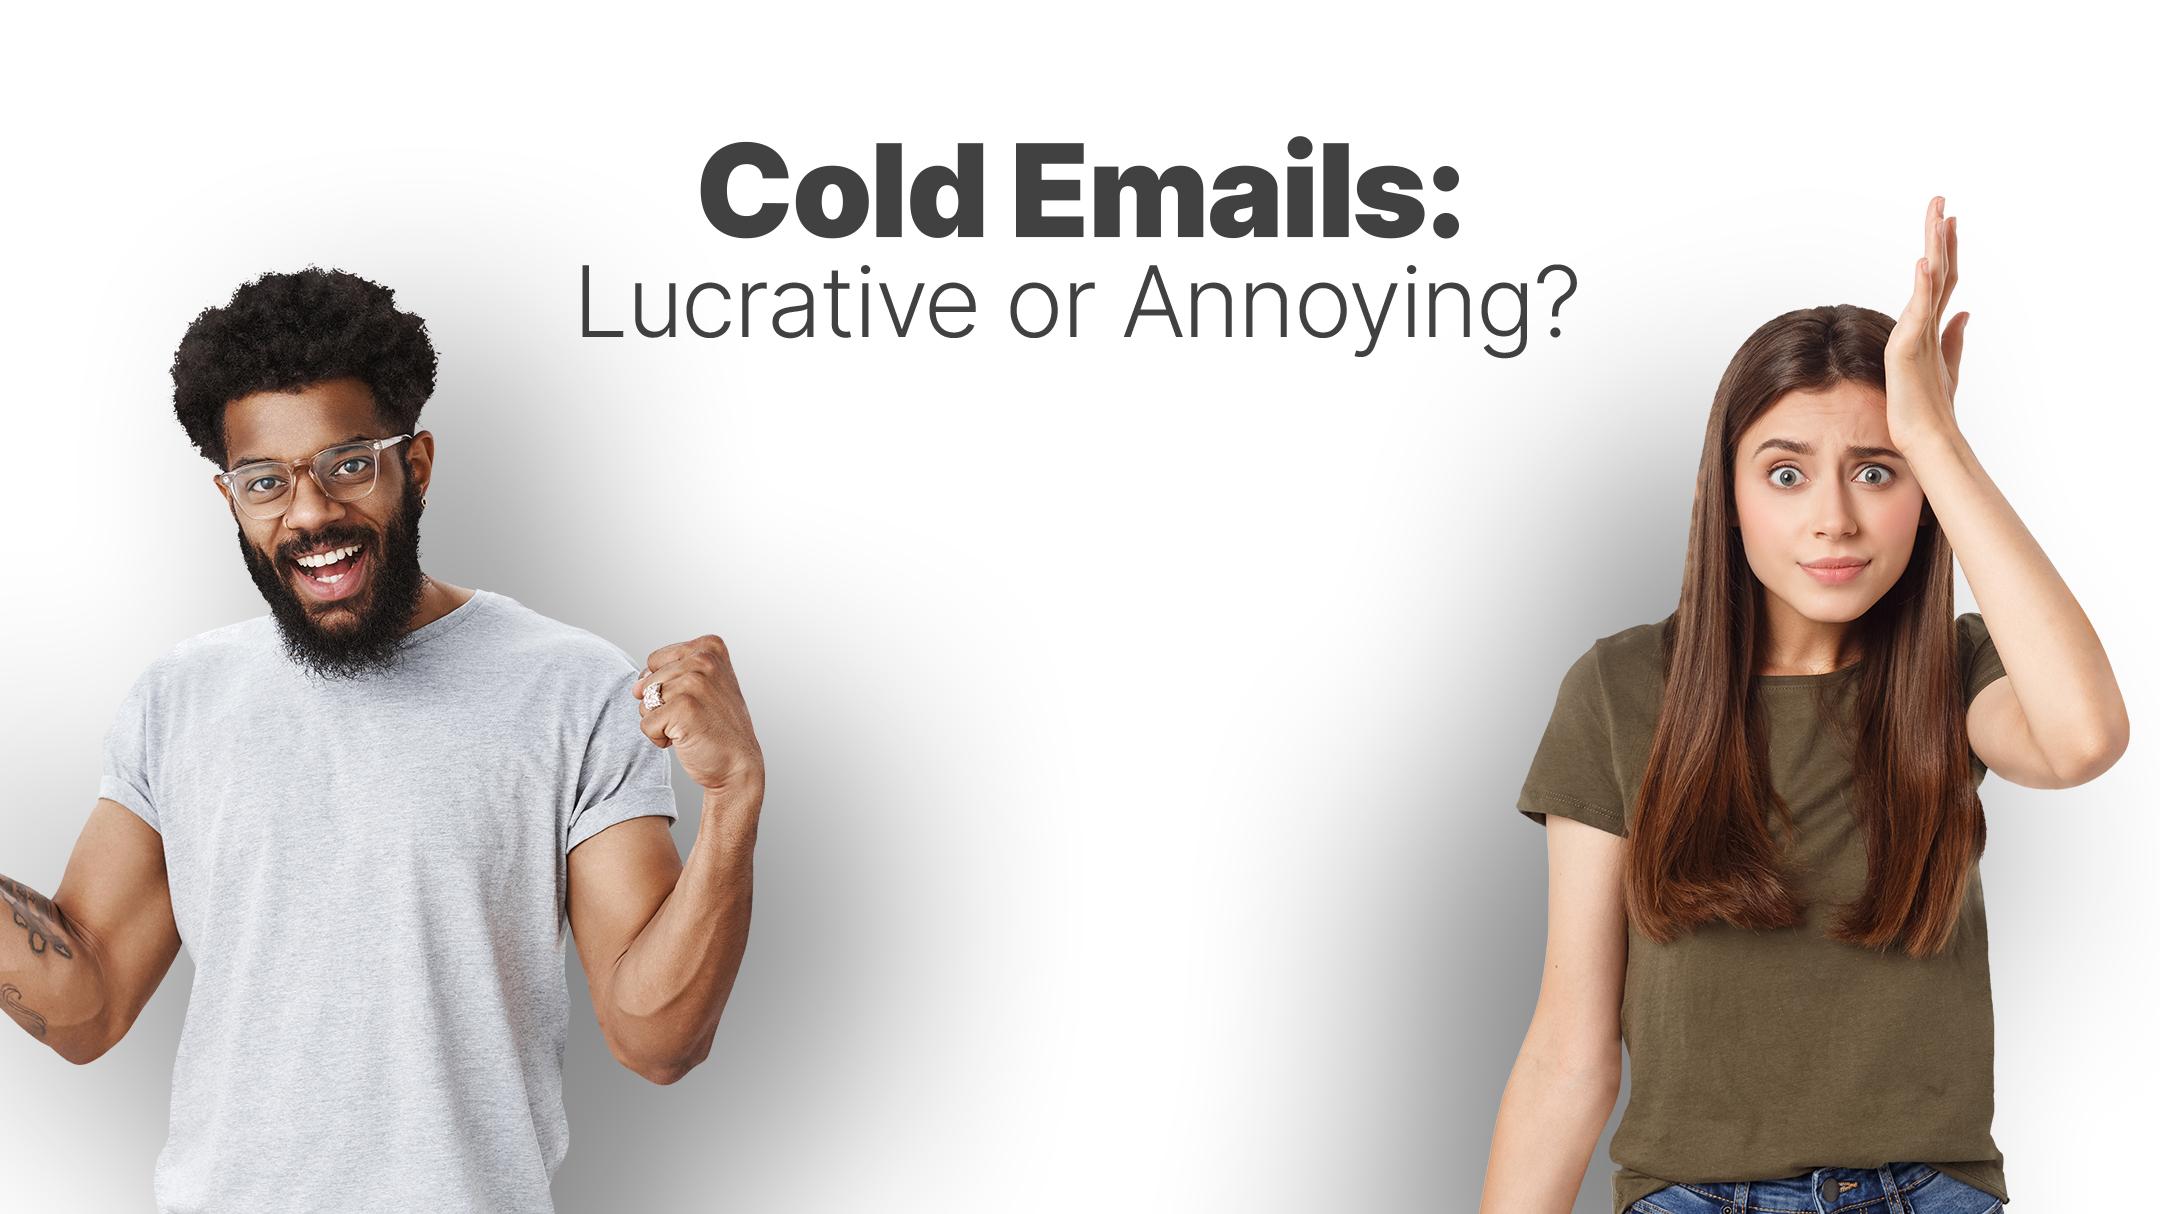 Cold emailing: Is it annoying or lucrative?